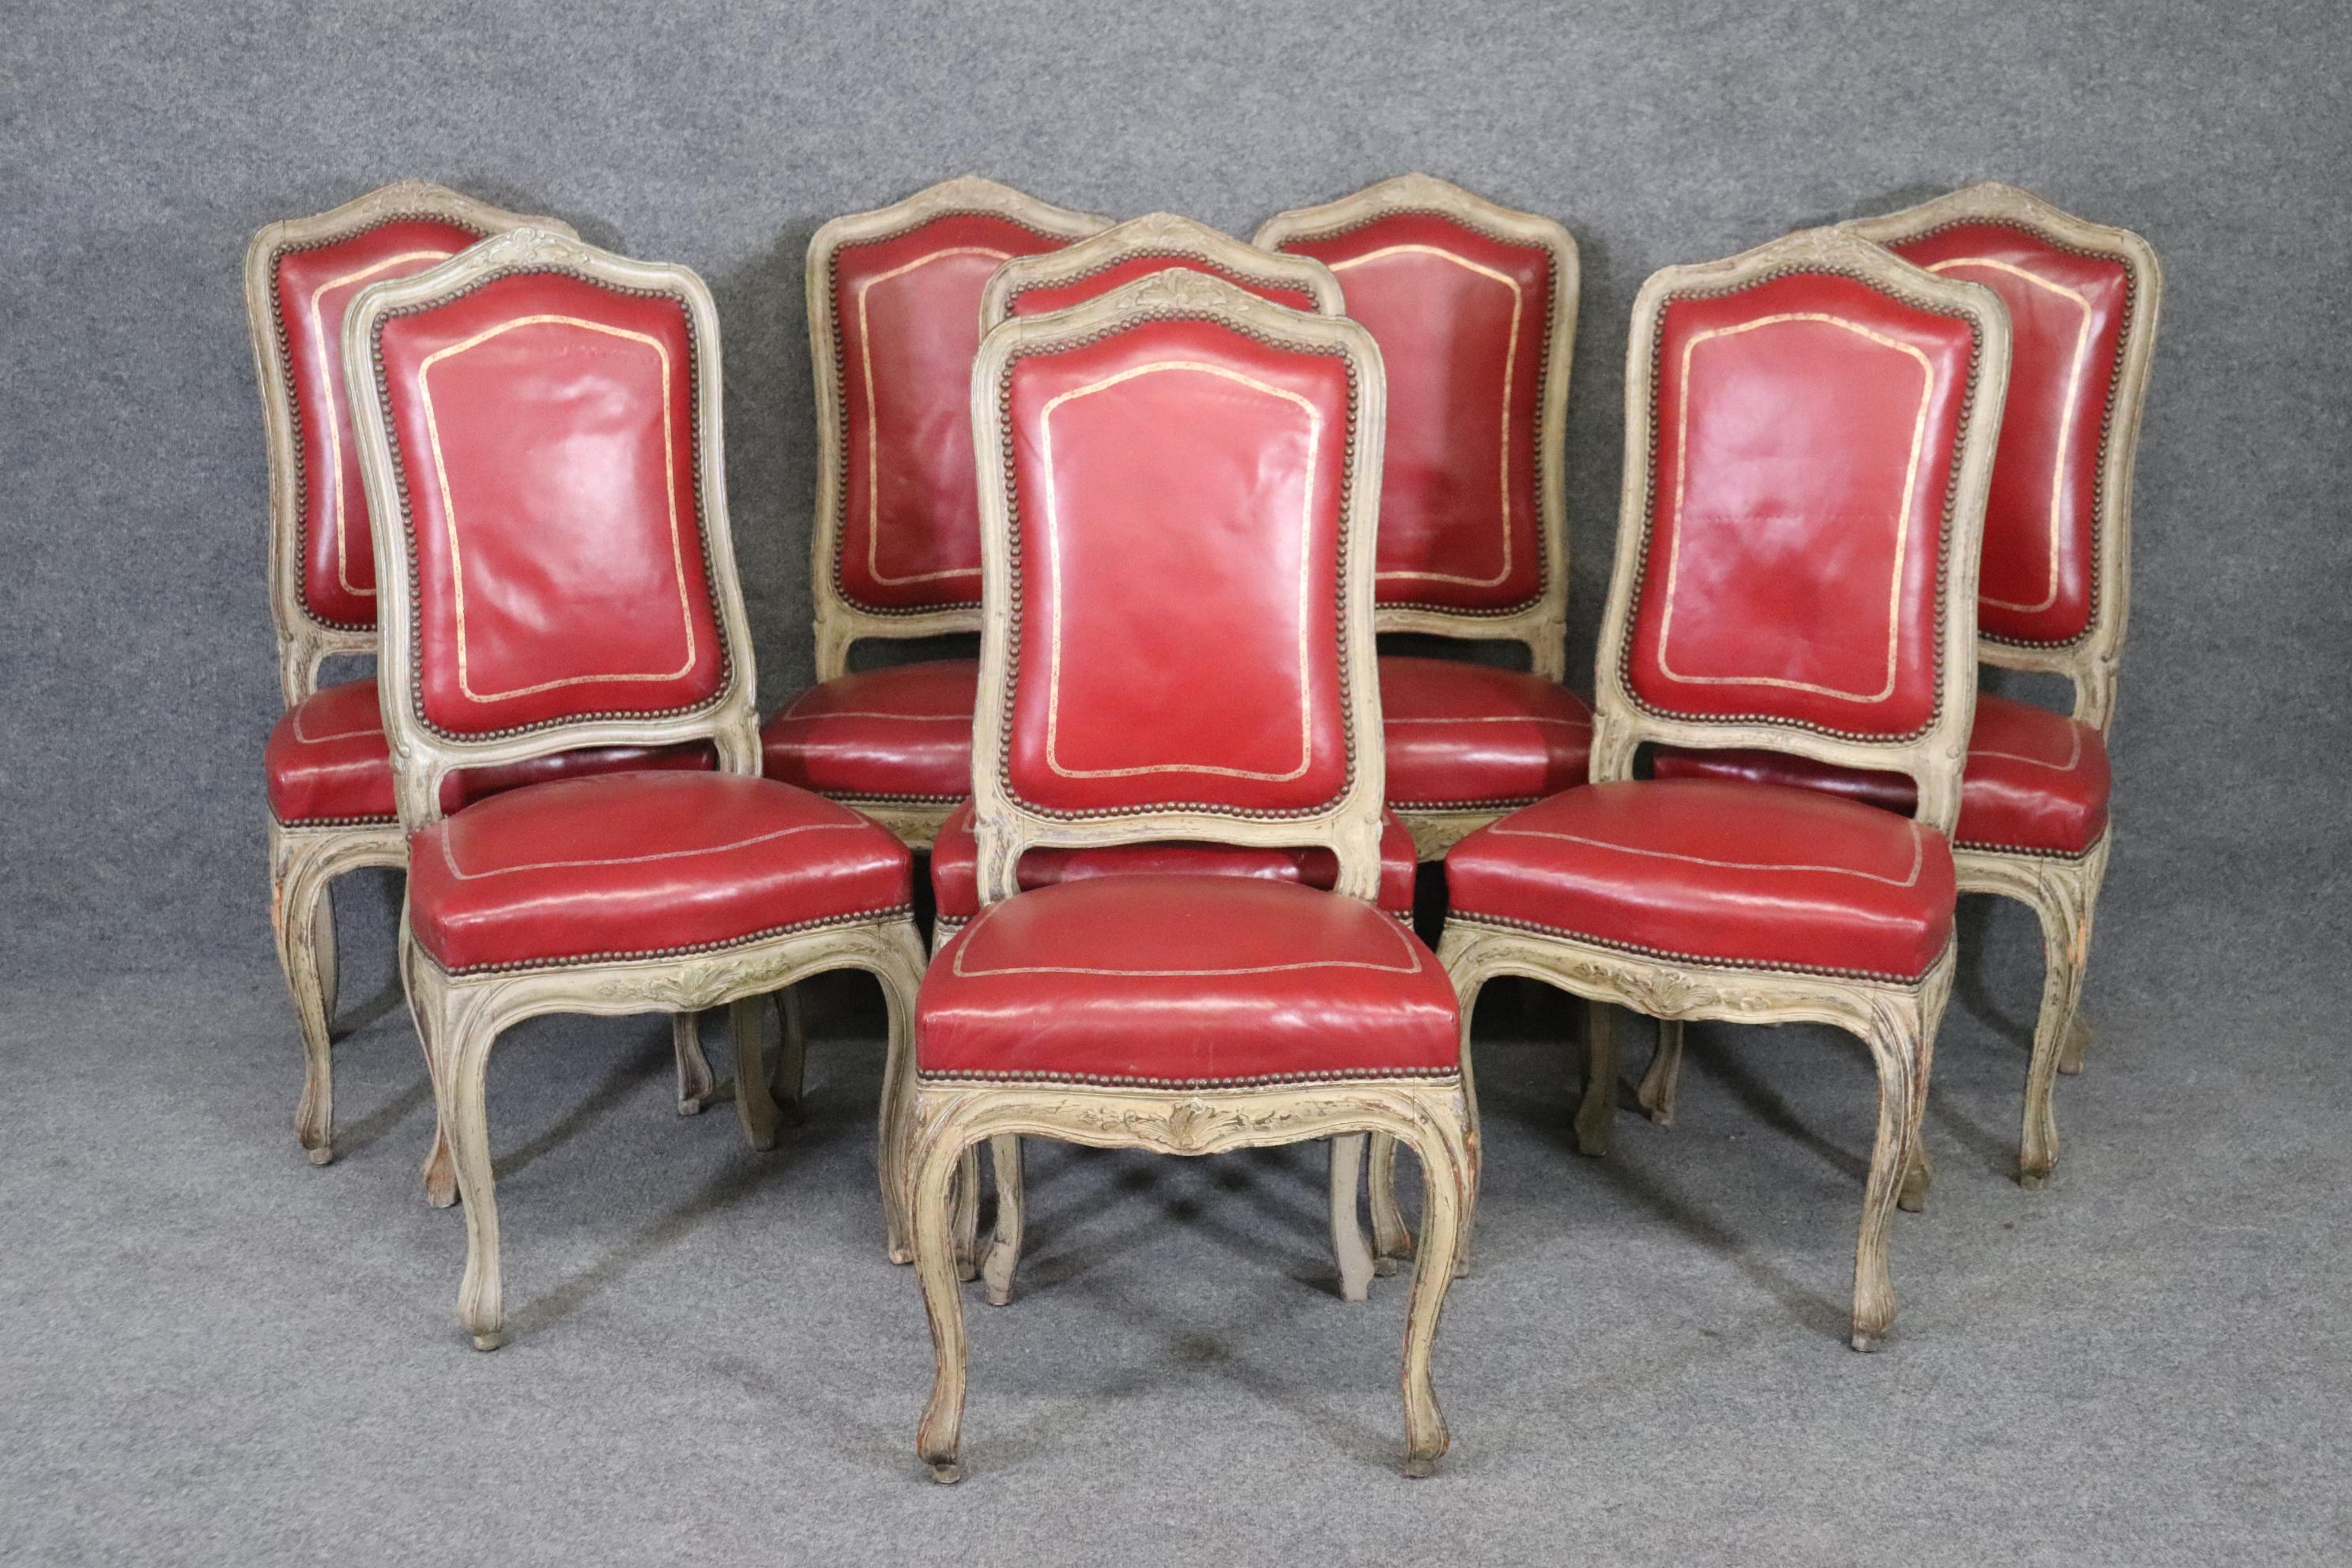 This is a very unique set of 8 French-made 1920-30s era dining chairs in an antiquewhite painted finish with bright lipstick red leather with gold tooled leather. The embossed leather really adds needed opulence to an otherwise more casual look and